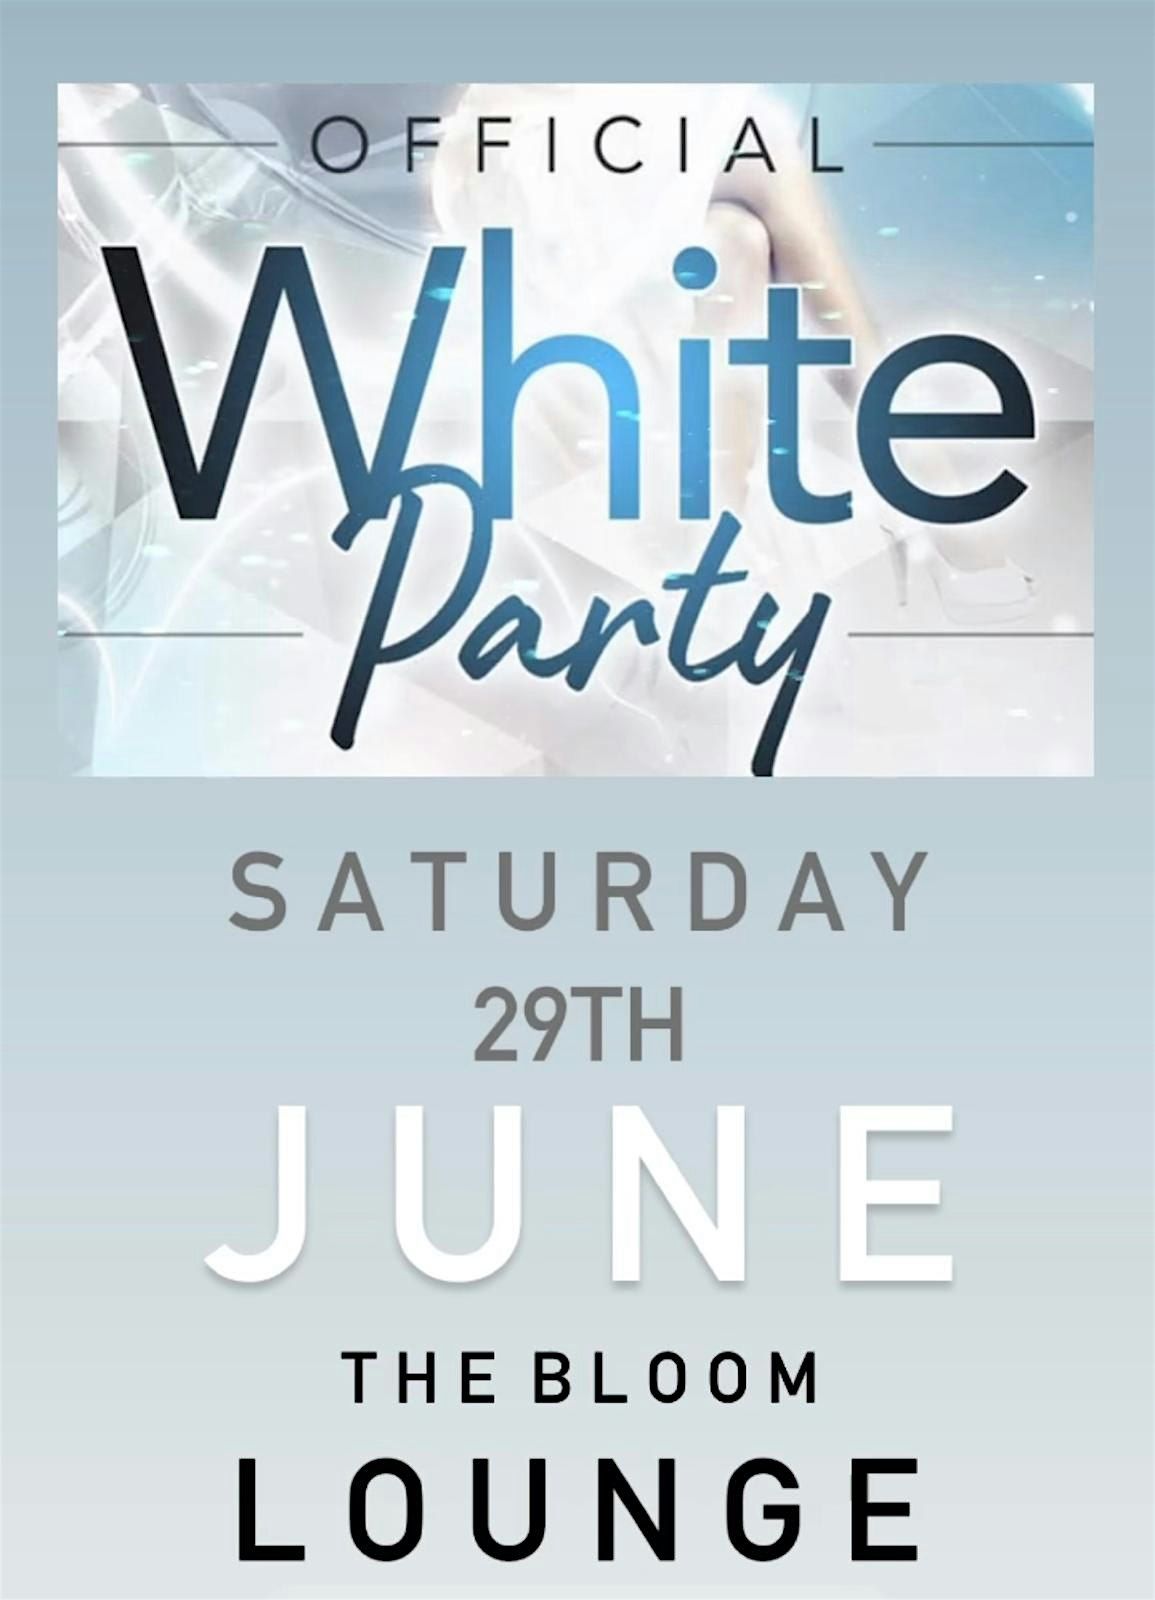 The Annual All White Party